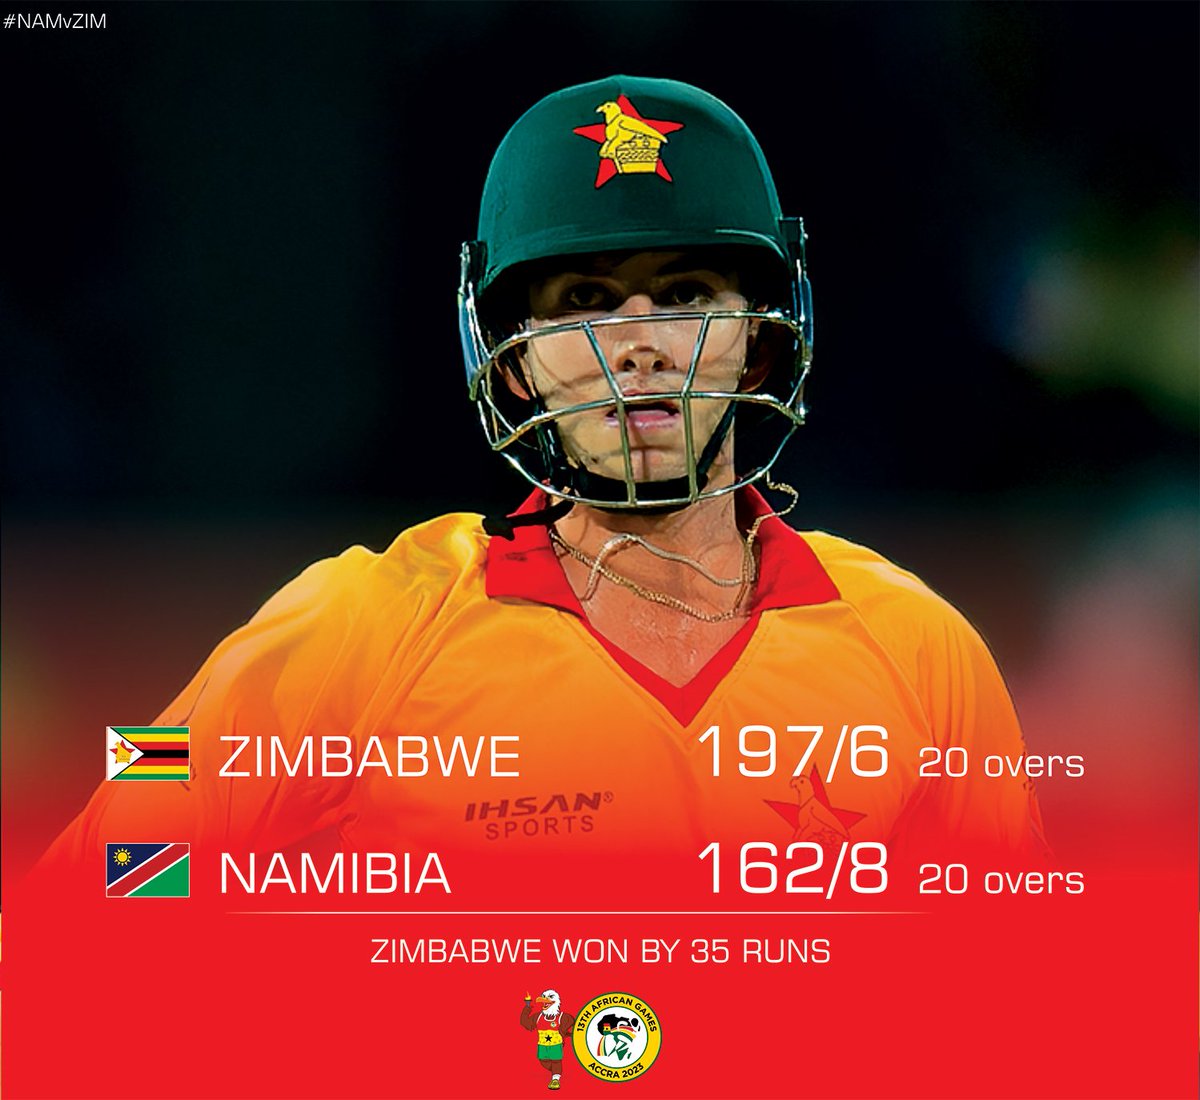 Zimbabwe start off their campaign of the 13th African Games in Ghana against Namibia with a 35-run win! 💪🏻#NAMvZIM